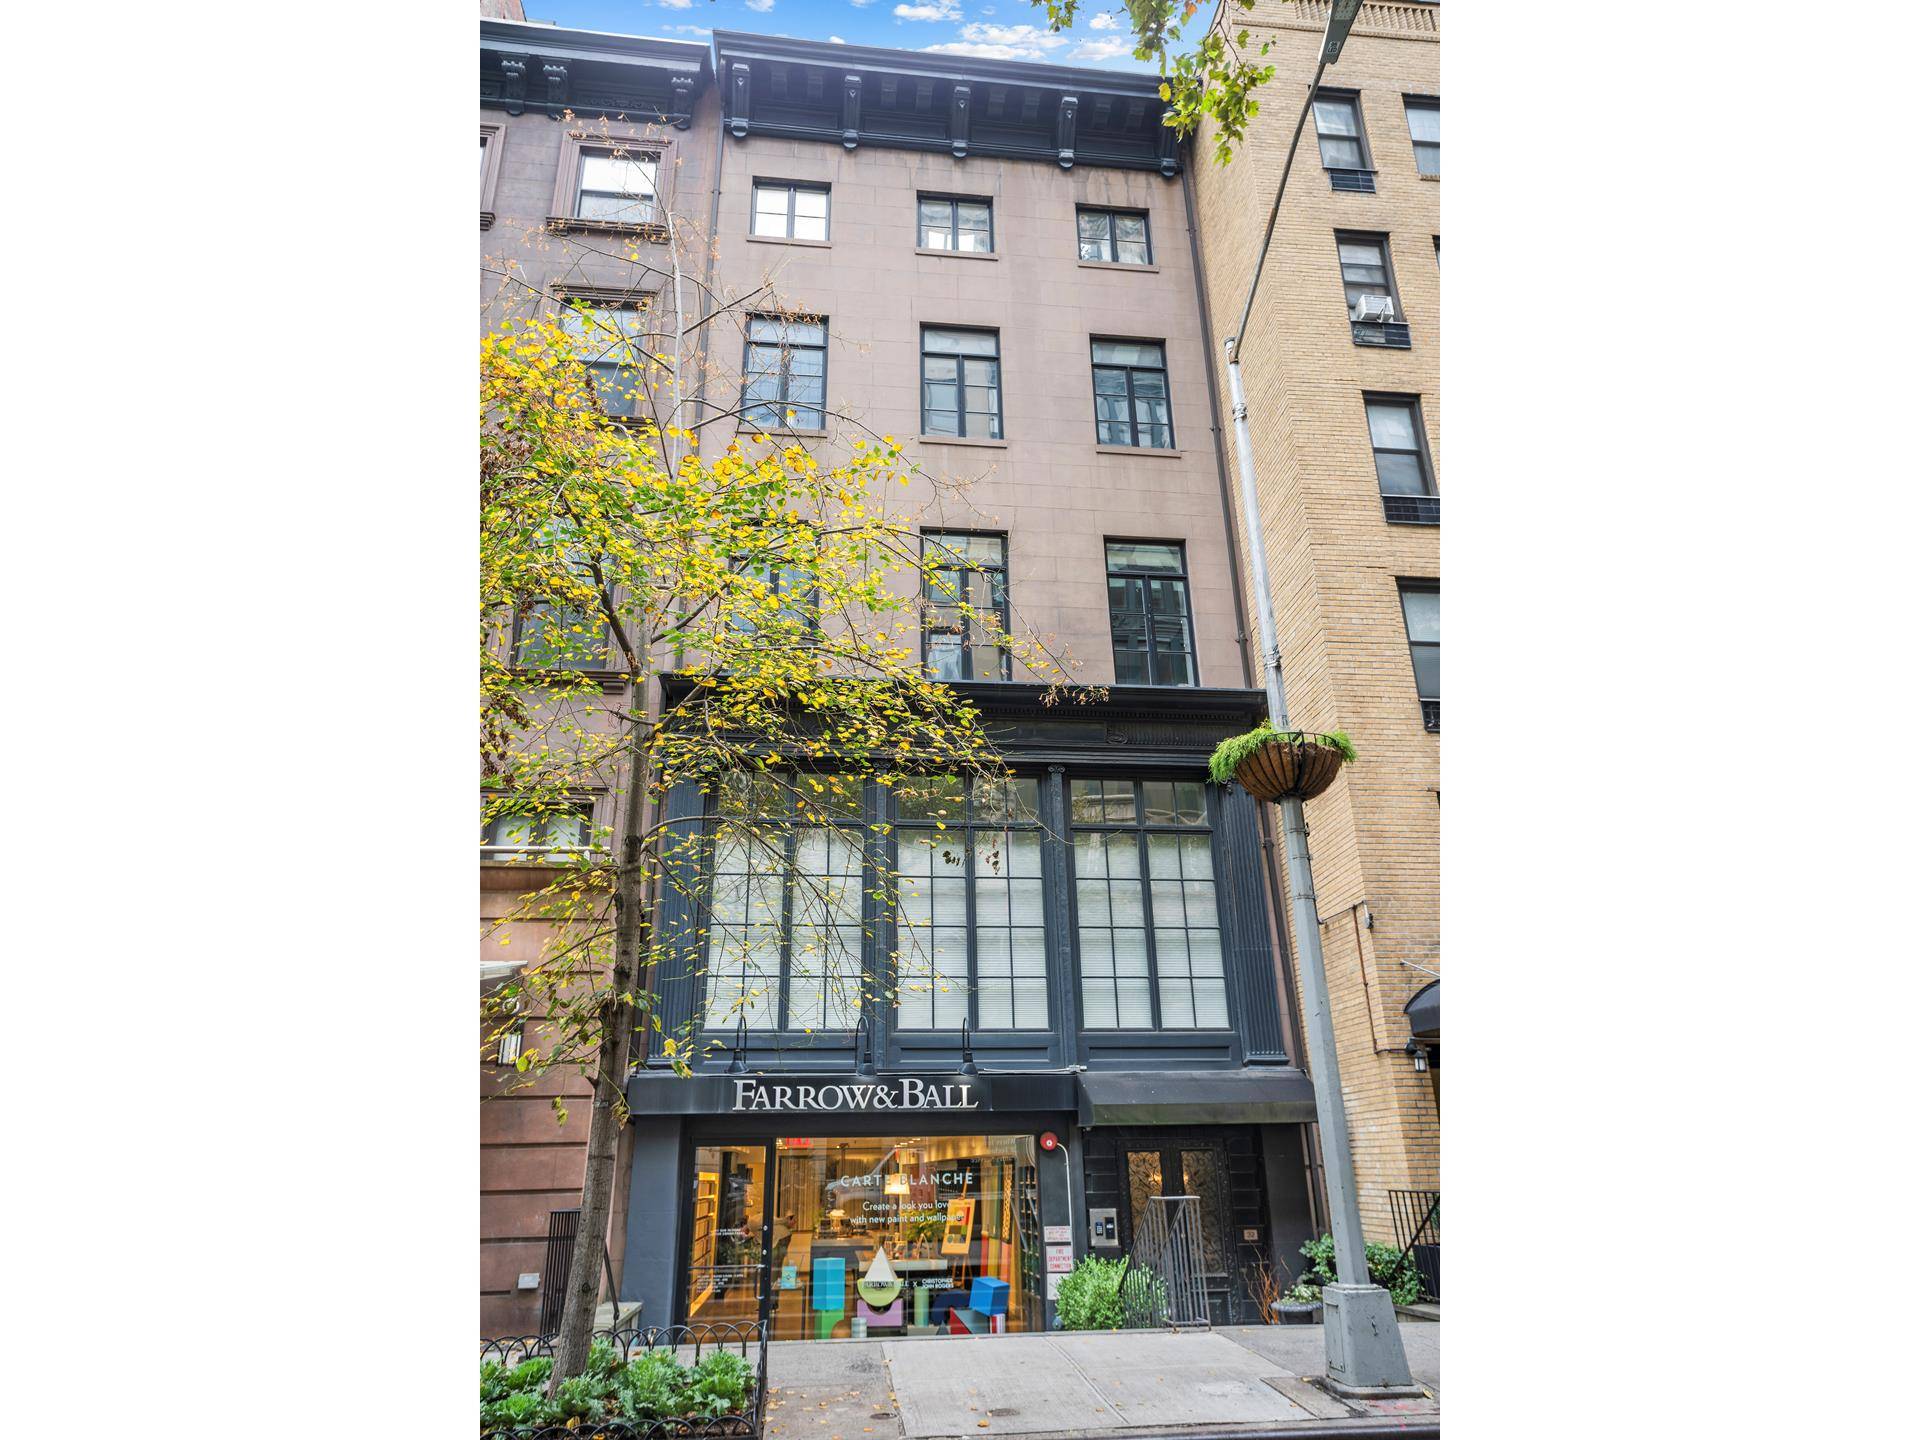 RARELY AVAILABLE ! ONE OF A KIND opportunity to own an incredible income producing townhouse on one of the finest blocks in Flatiron.